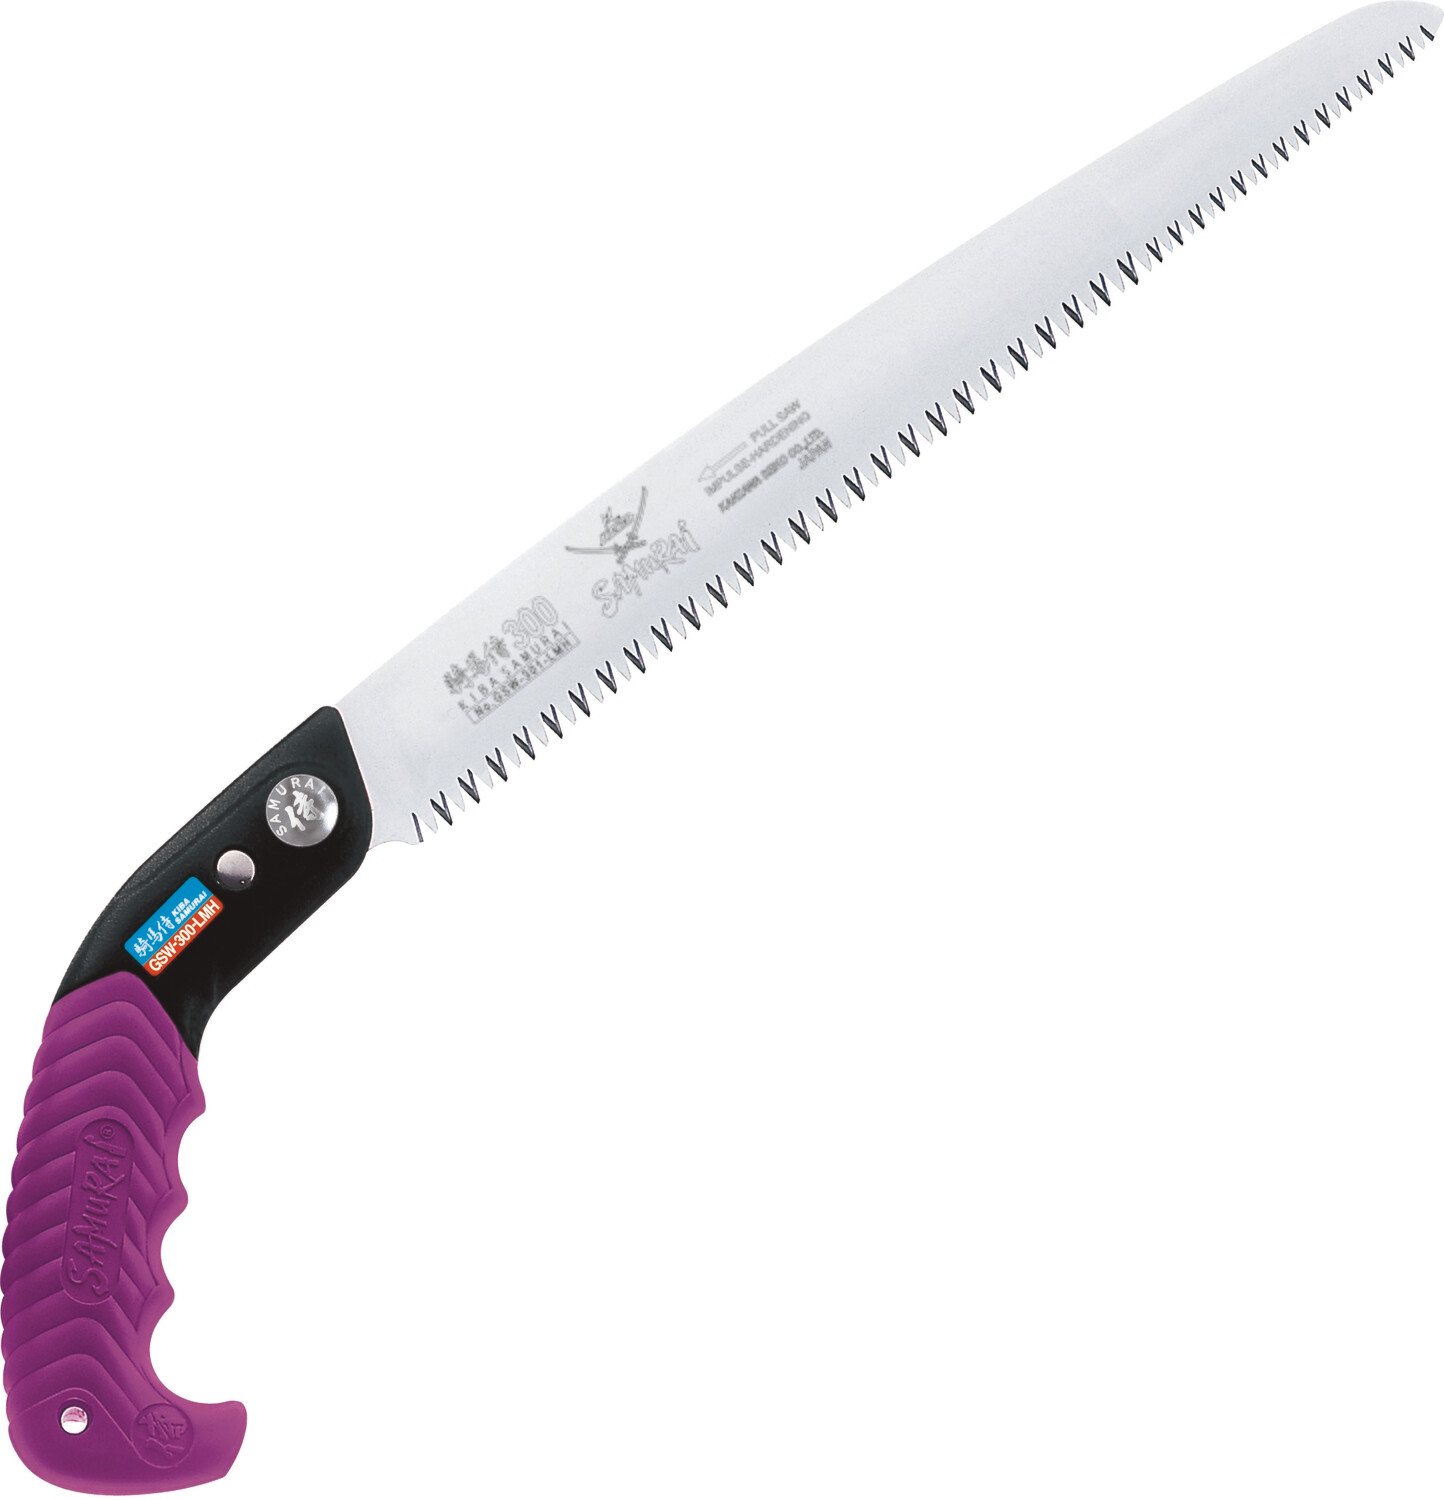 GSW KIBASAMURAI Straight saw in protective cover with variable tooth pitch